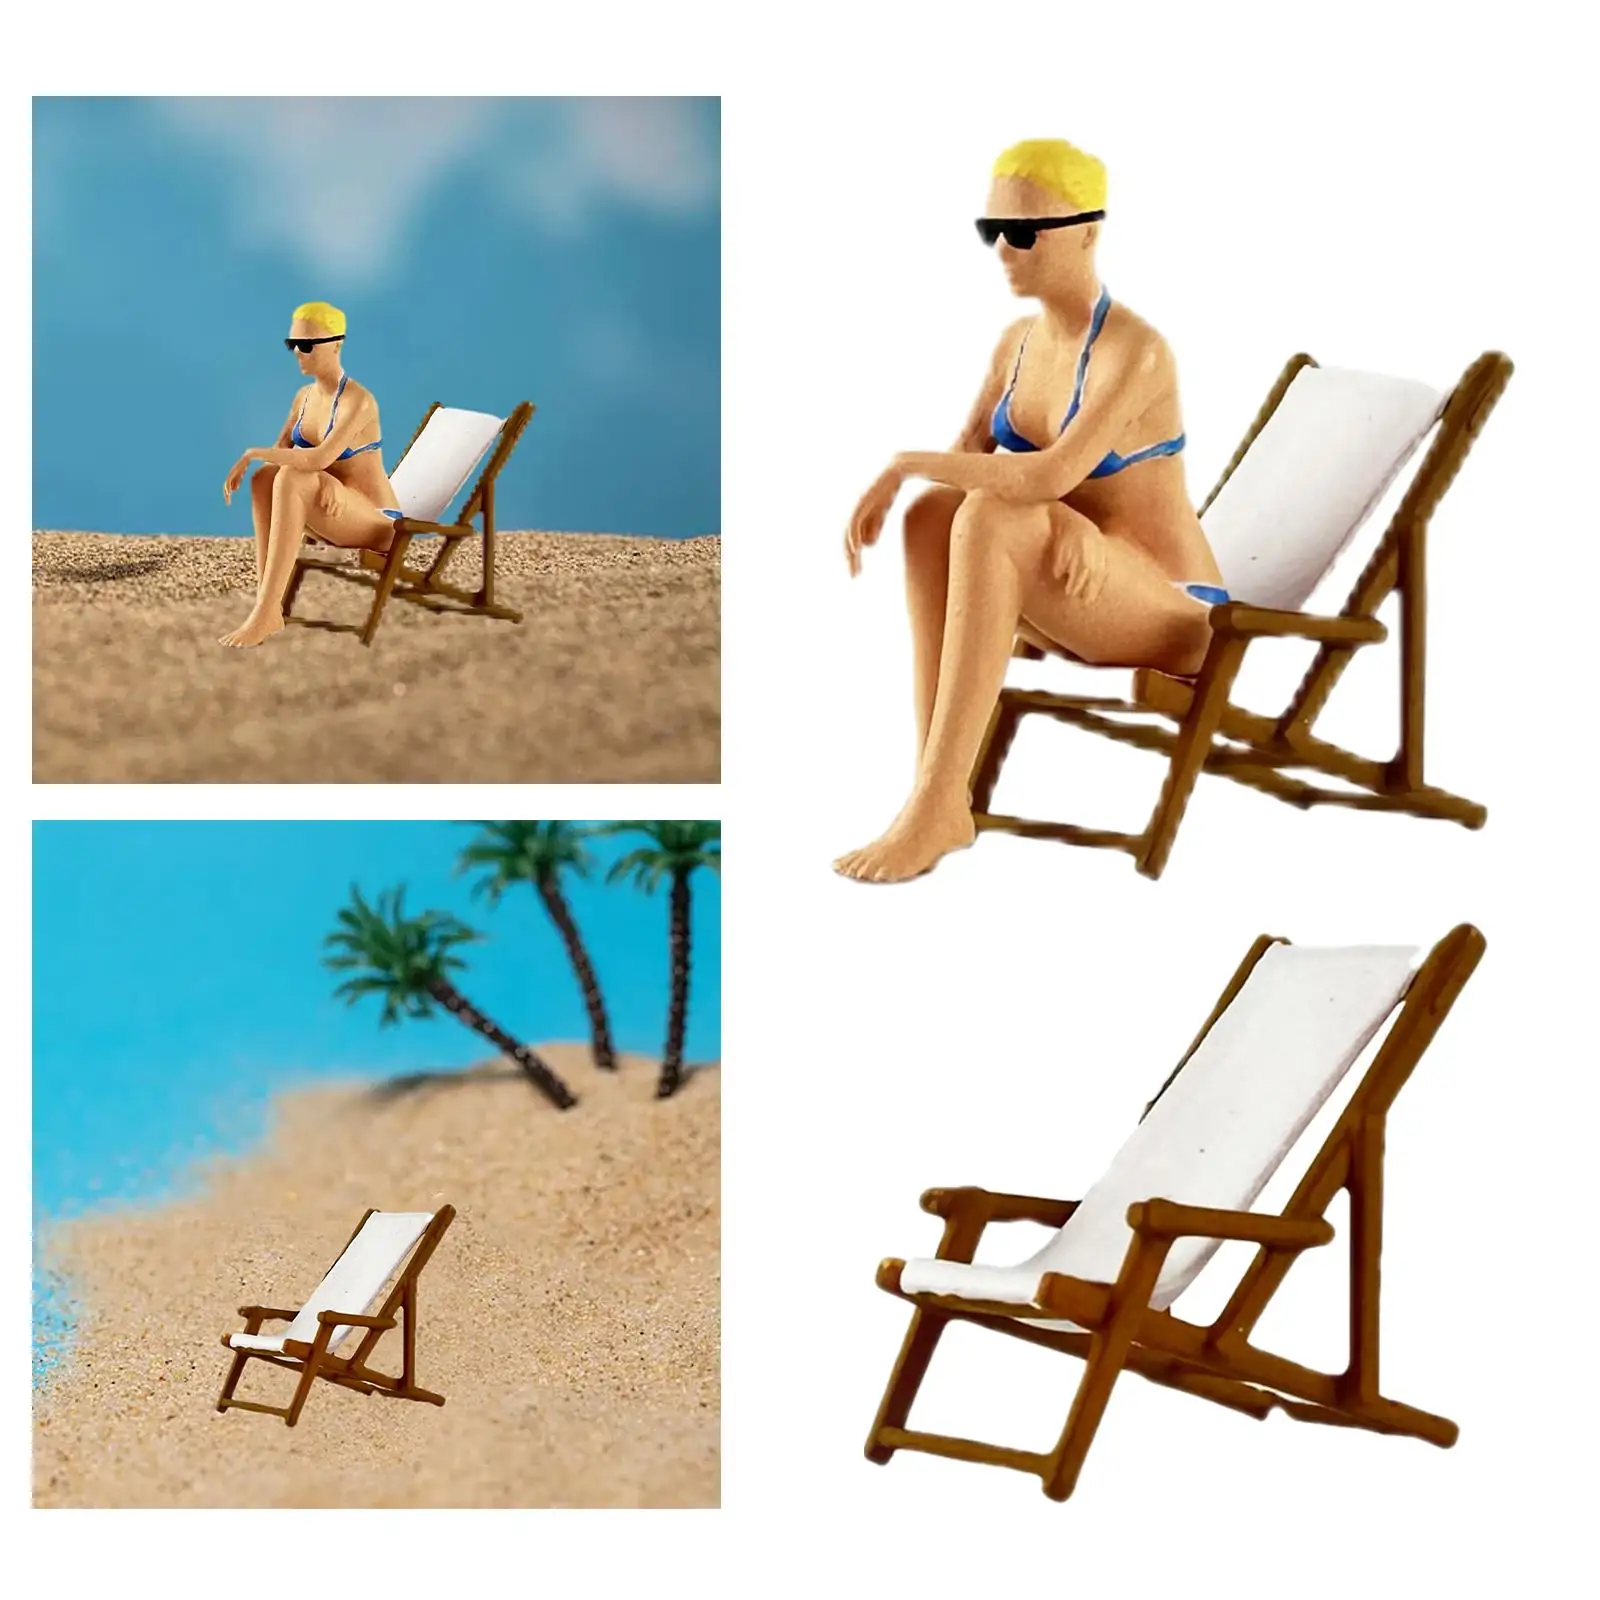 1/64 Diorama Figure Resin Miniature Beach Surfing Scene for Dollhouse Accessories Model Trains Architecture Model DIY Projects